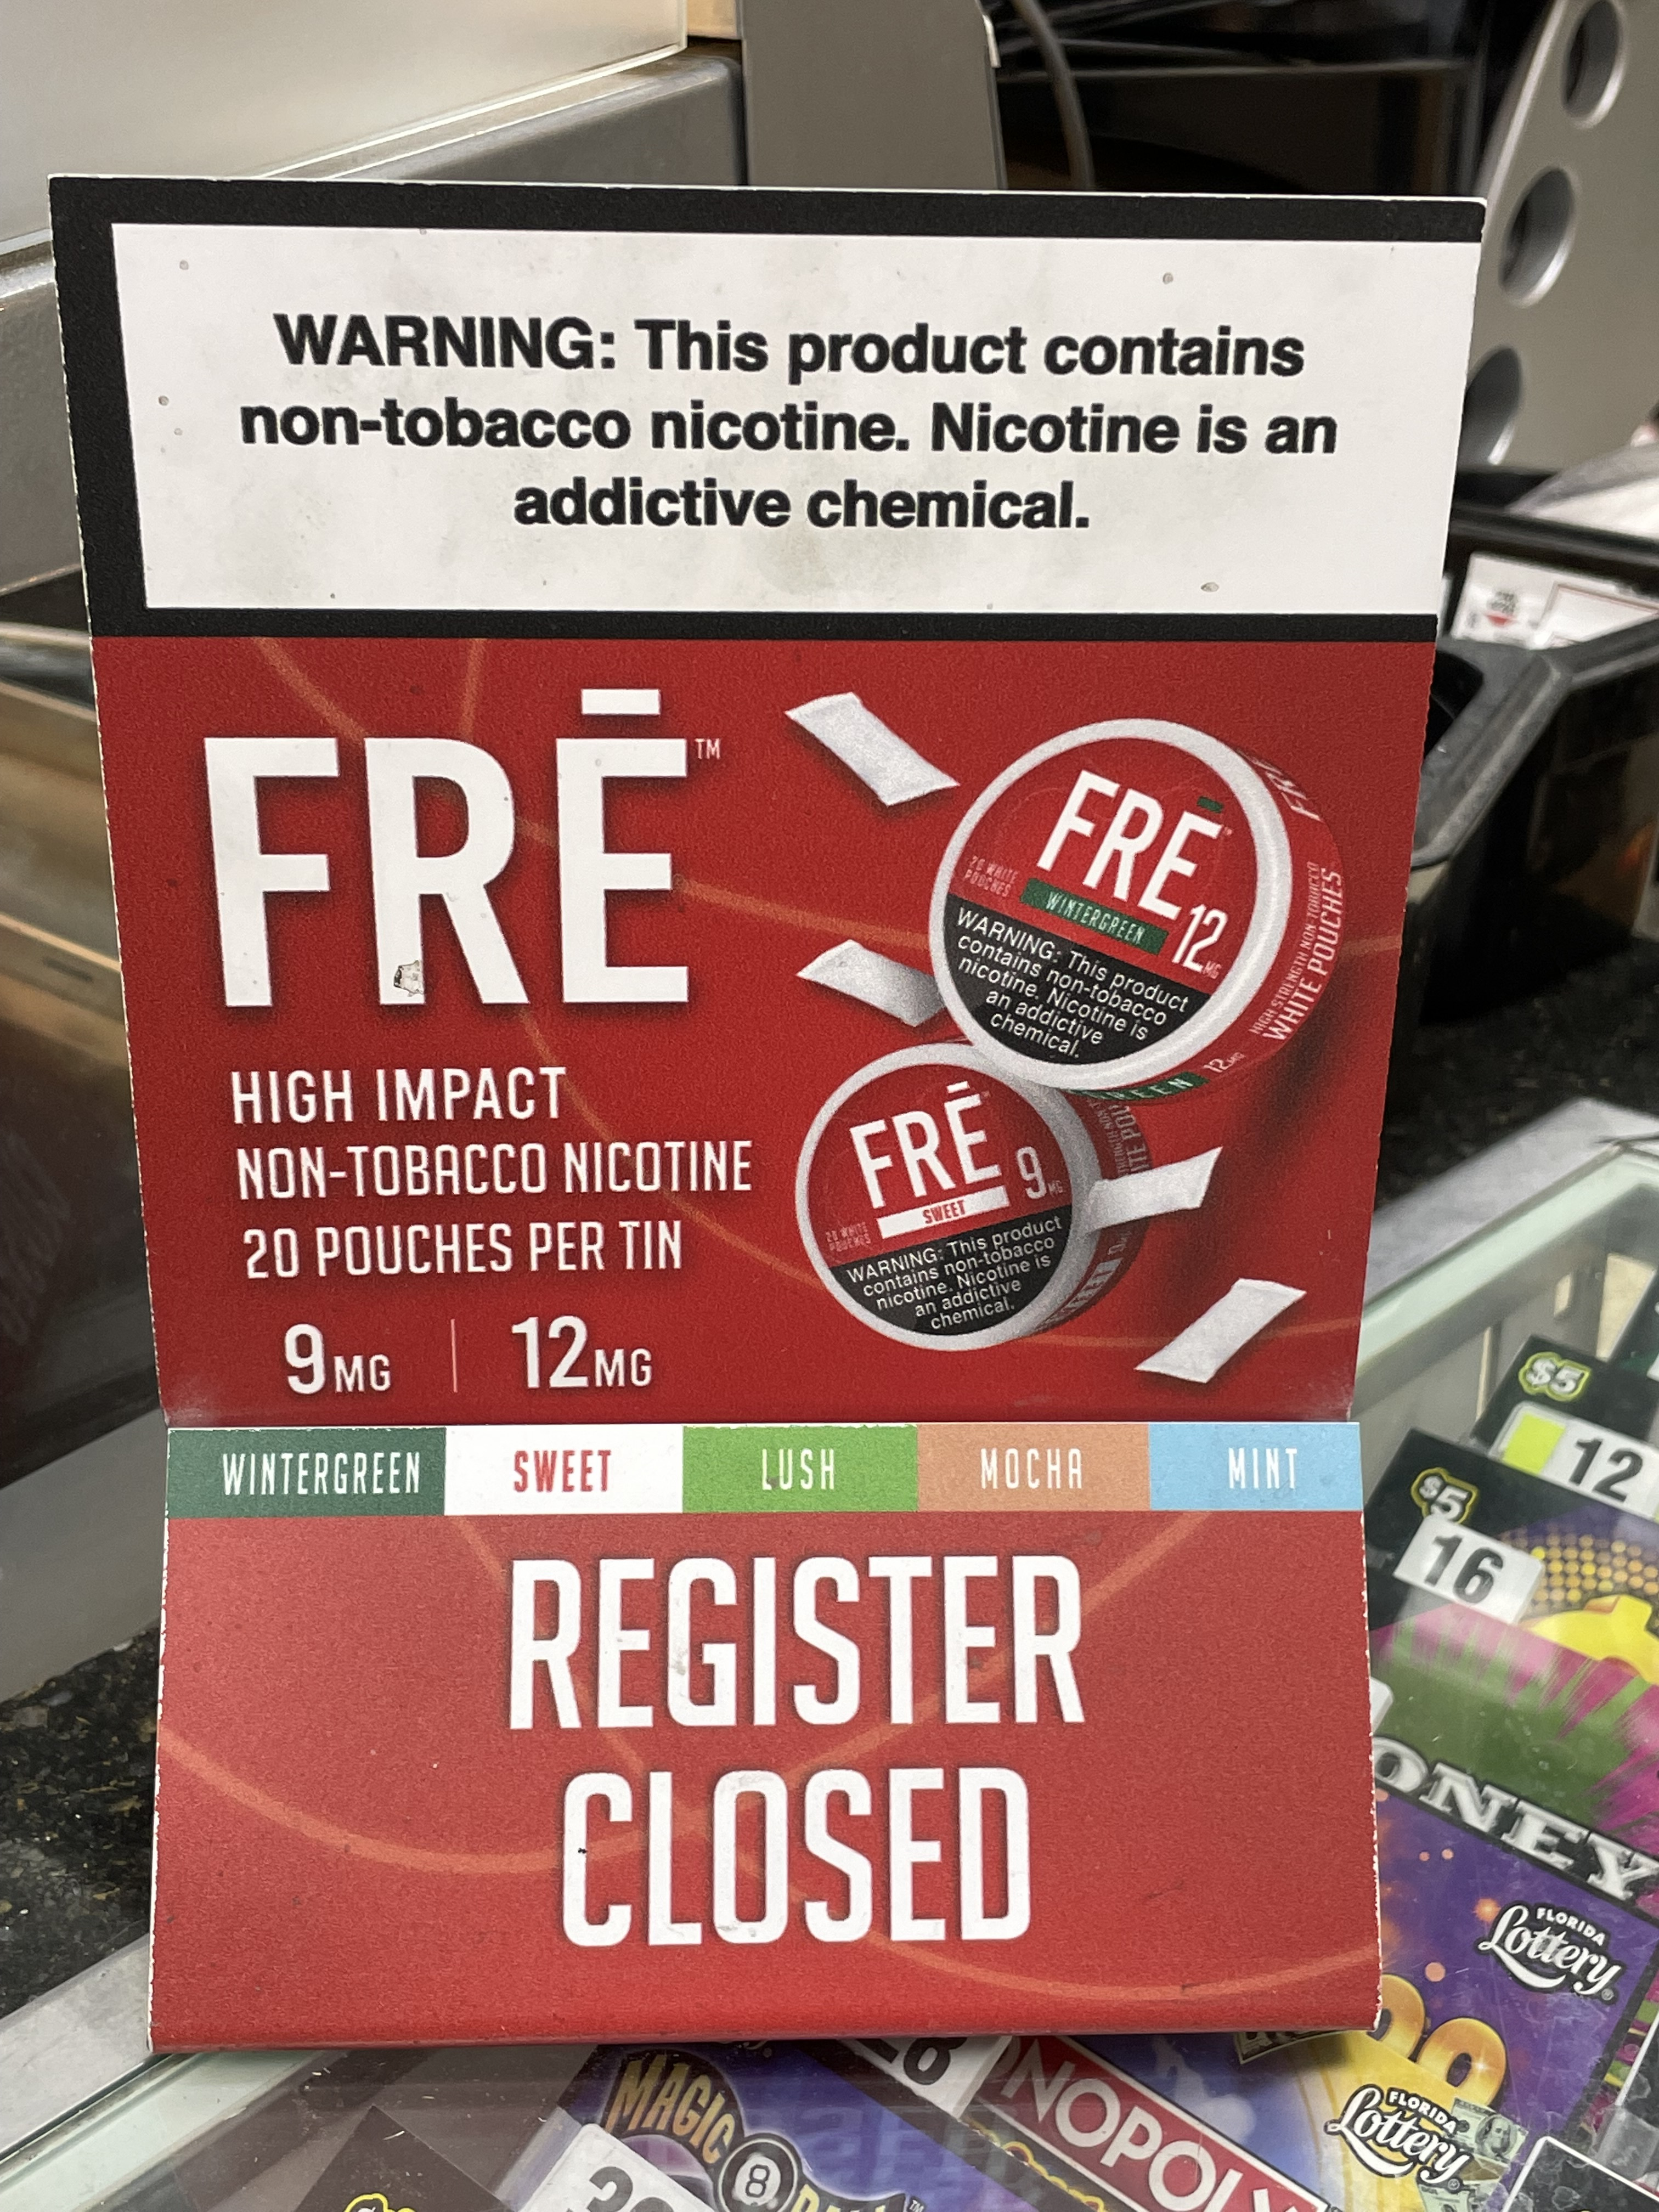 countertop ad for Fre nicotine pouches 